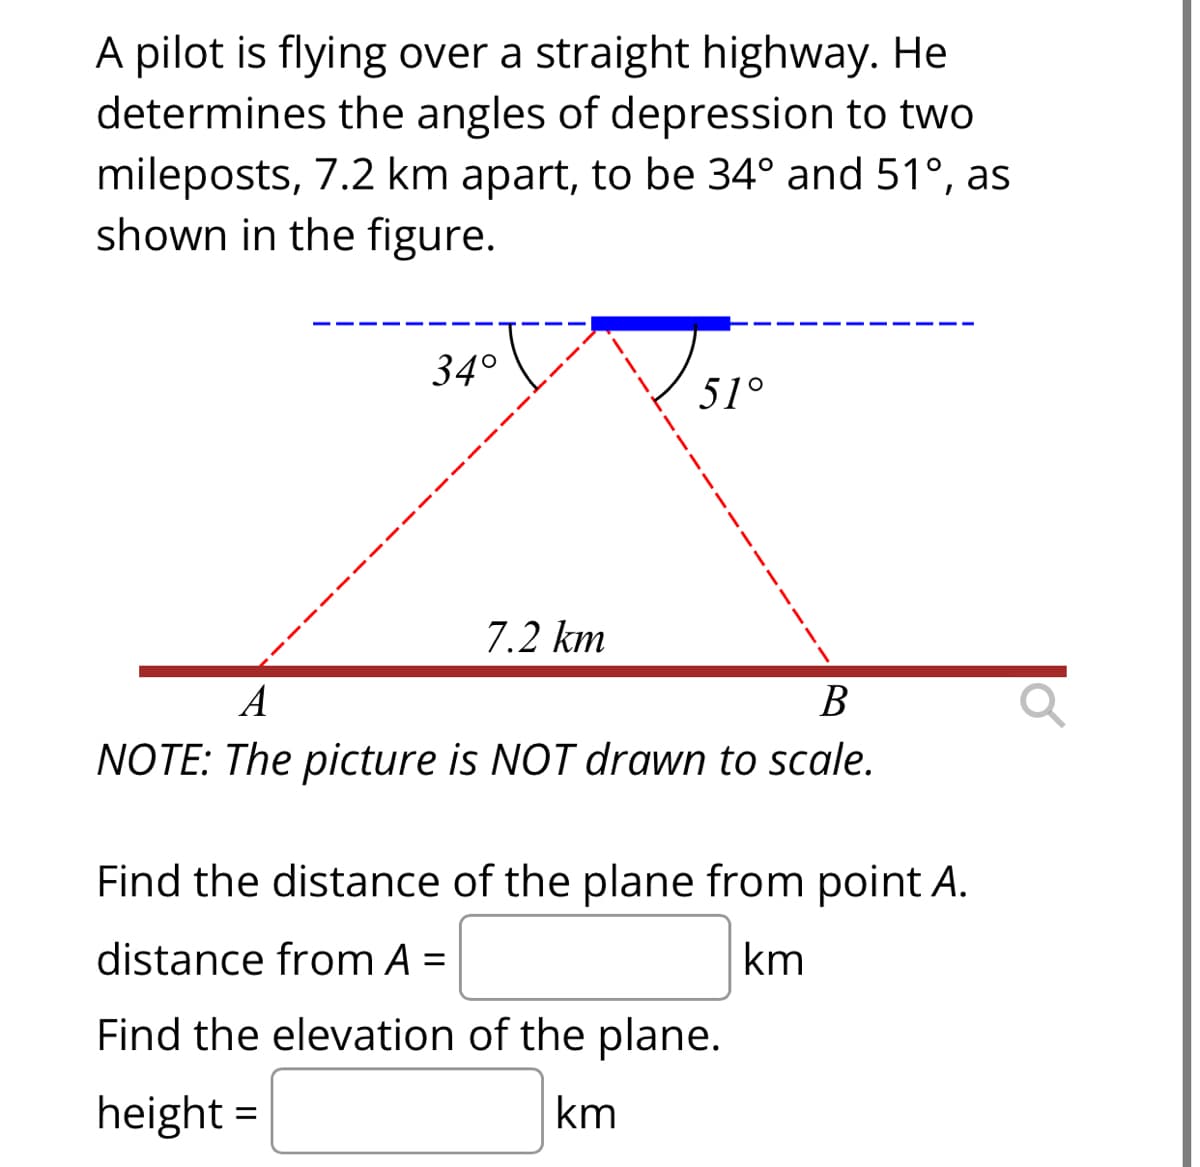 A pilot is flying over a straight highway. He
determines the angles of depression to two
mileposts, 7.2 km apart, to be 34° and 51°, as
shown in the figure.
34°
7.2 km
51°
A
B
NOTE: The picture is NOT drawn to scale.
Find the distance of the plane from point A.
distance from A =
km
Find the elevation of the plane.
height =
km